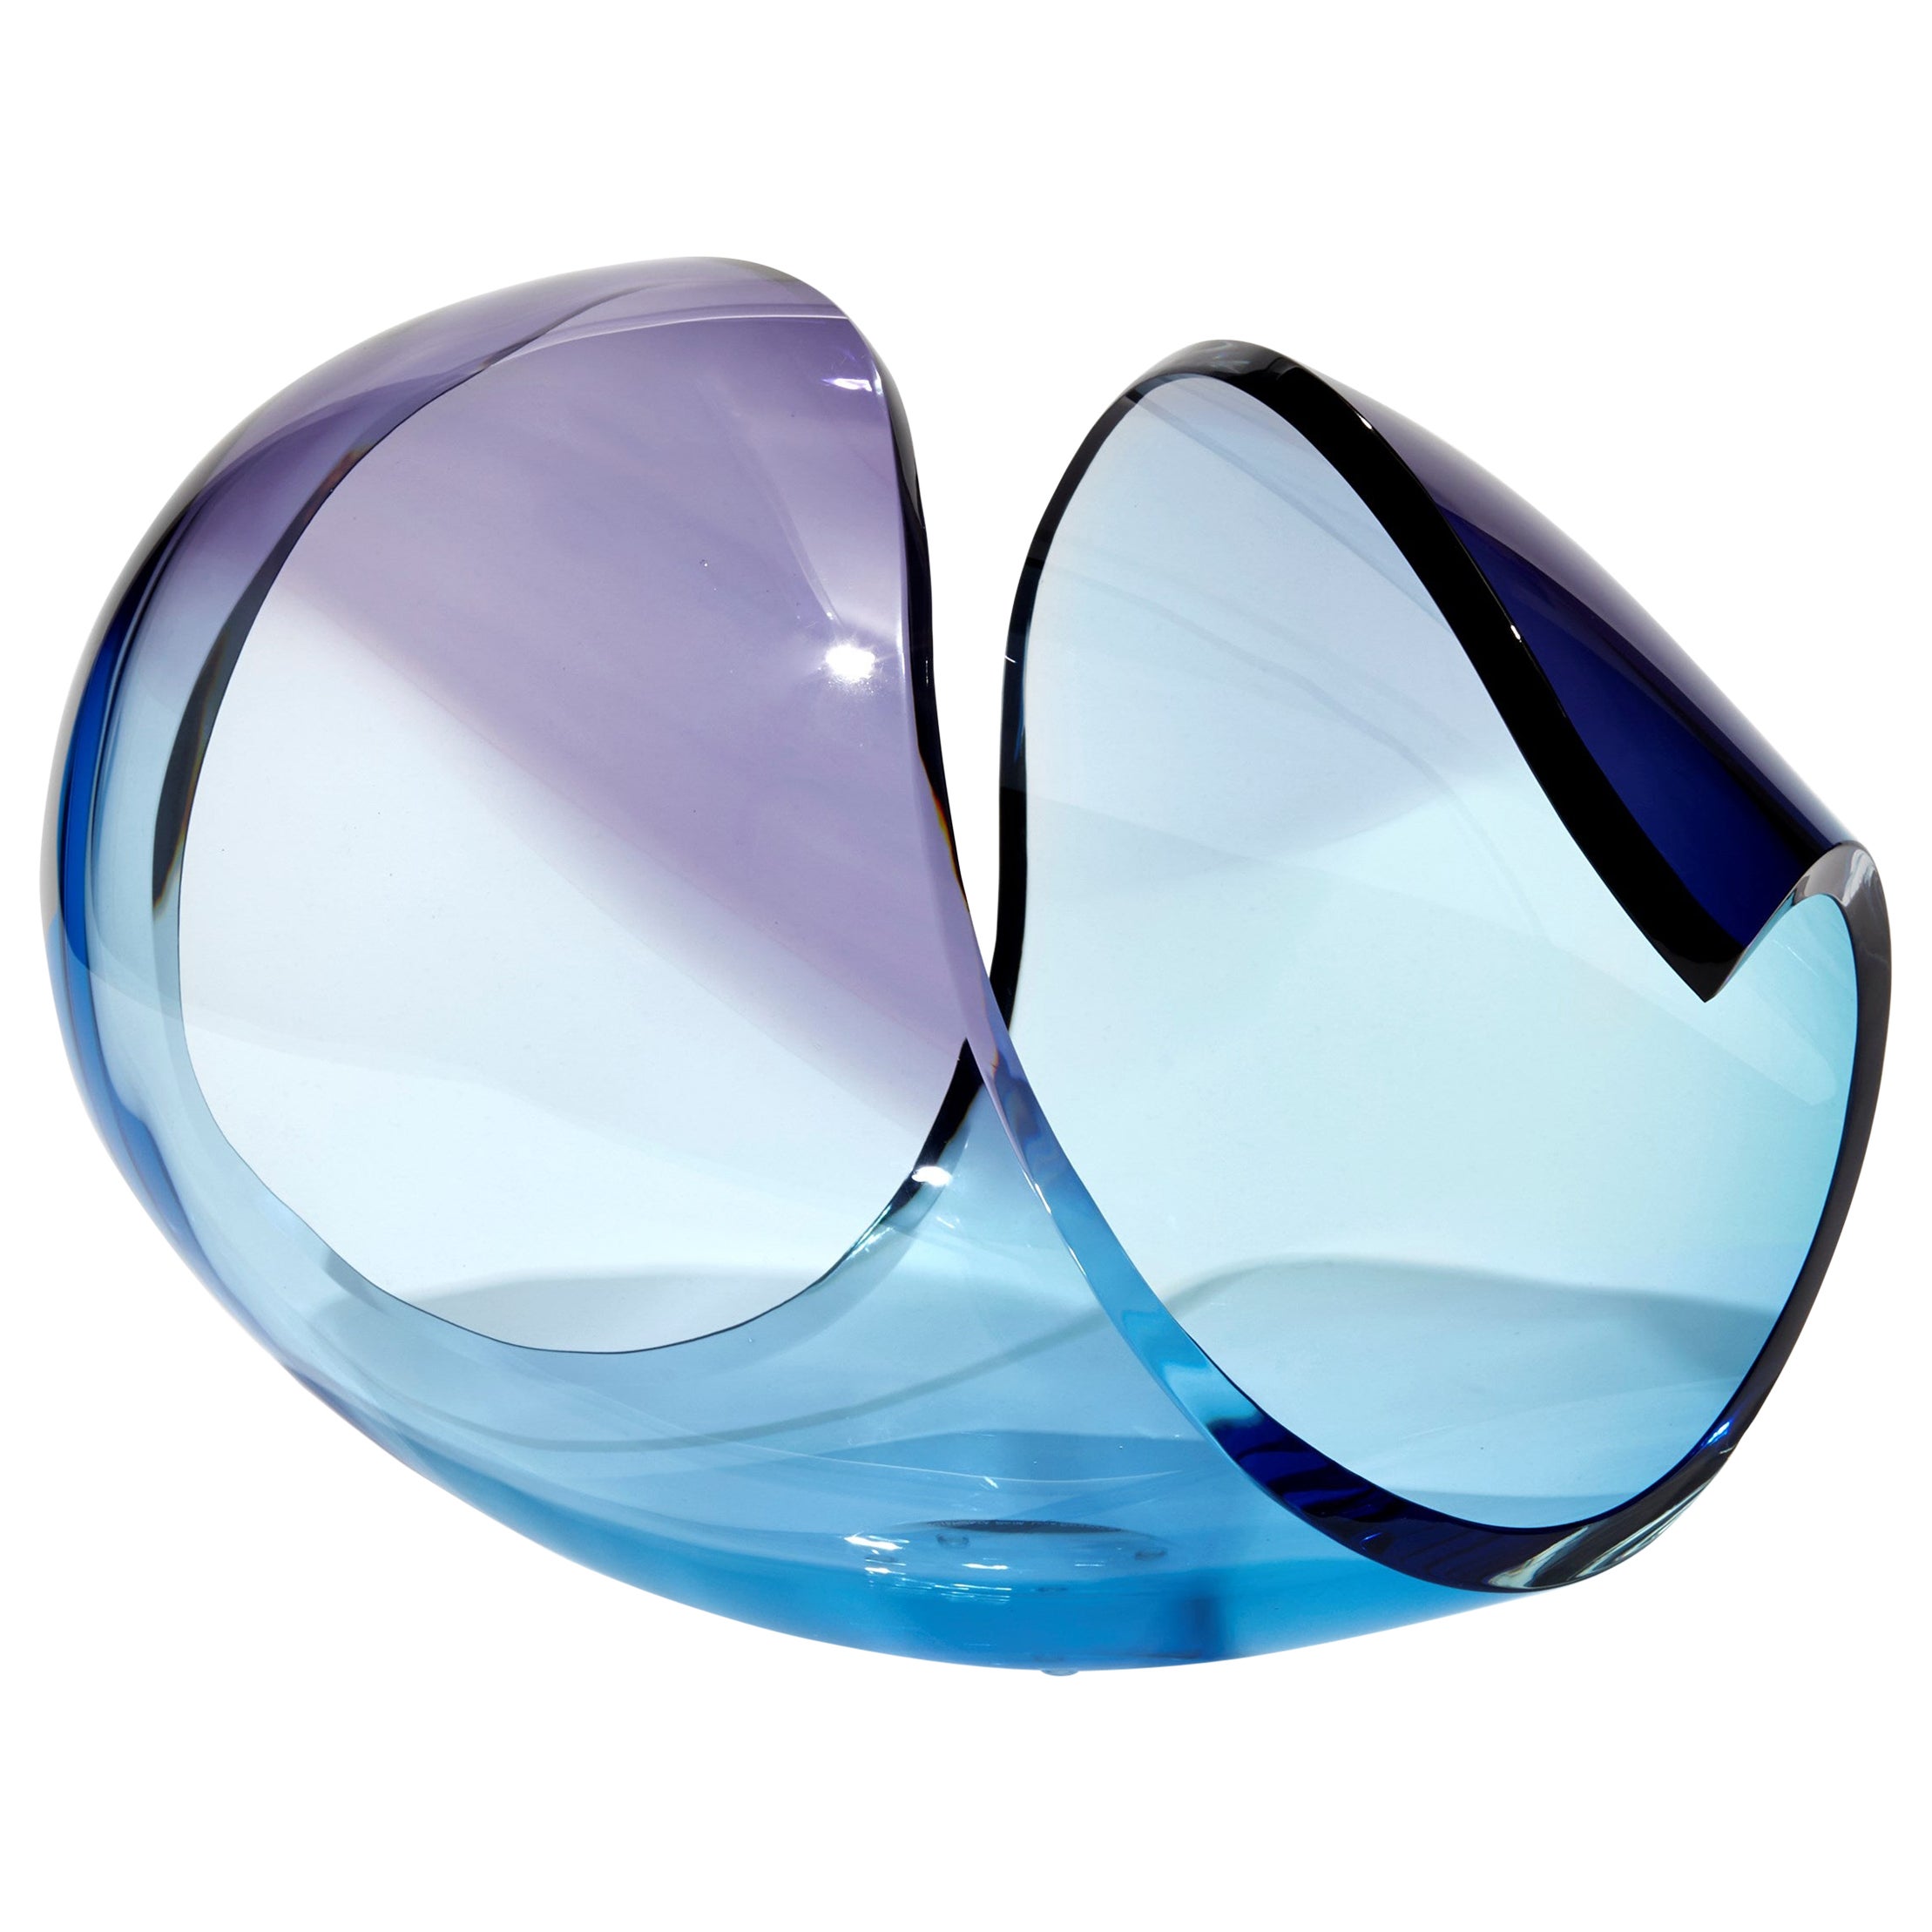  Planet in Turquoise & Purple, an Abstract Glass Centrepiece by Lena Bergström For Sale